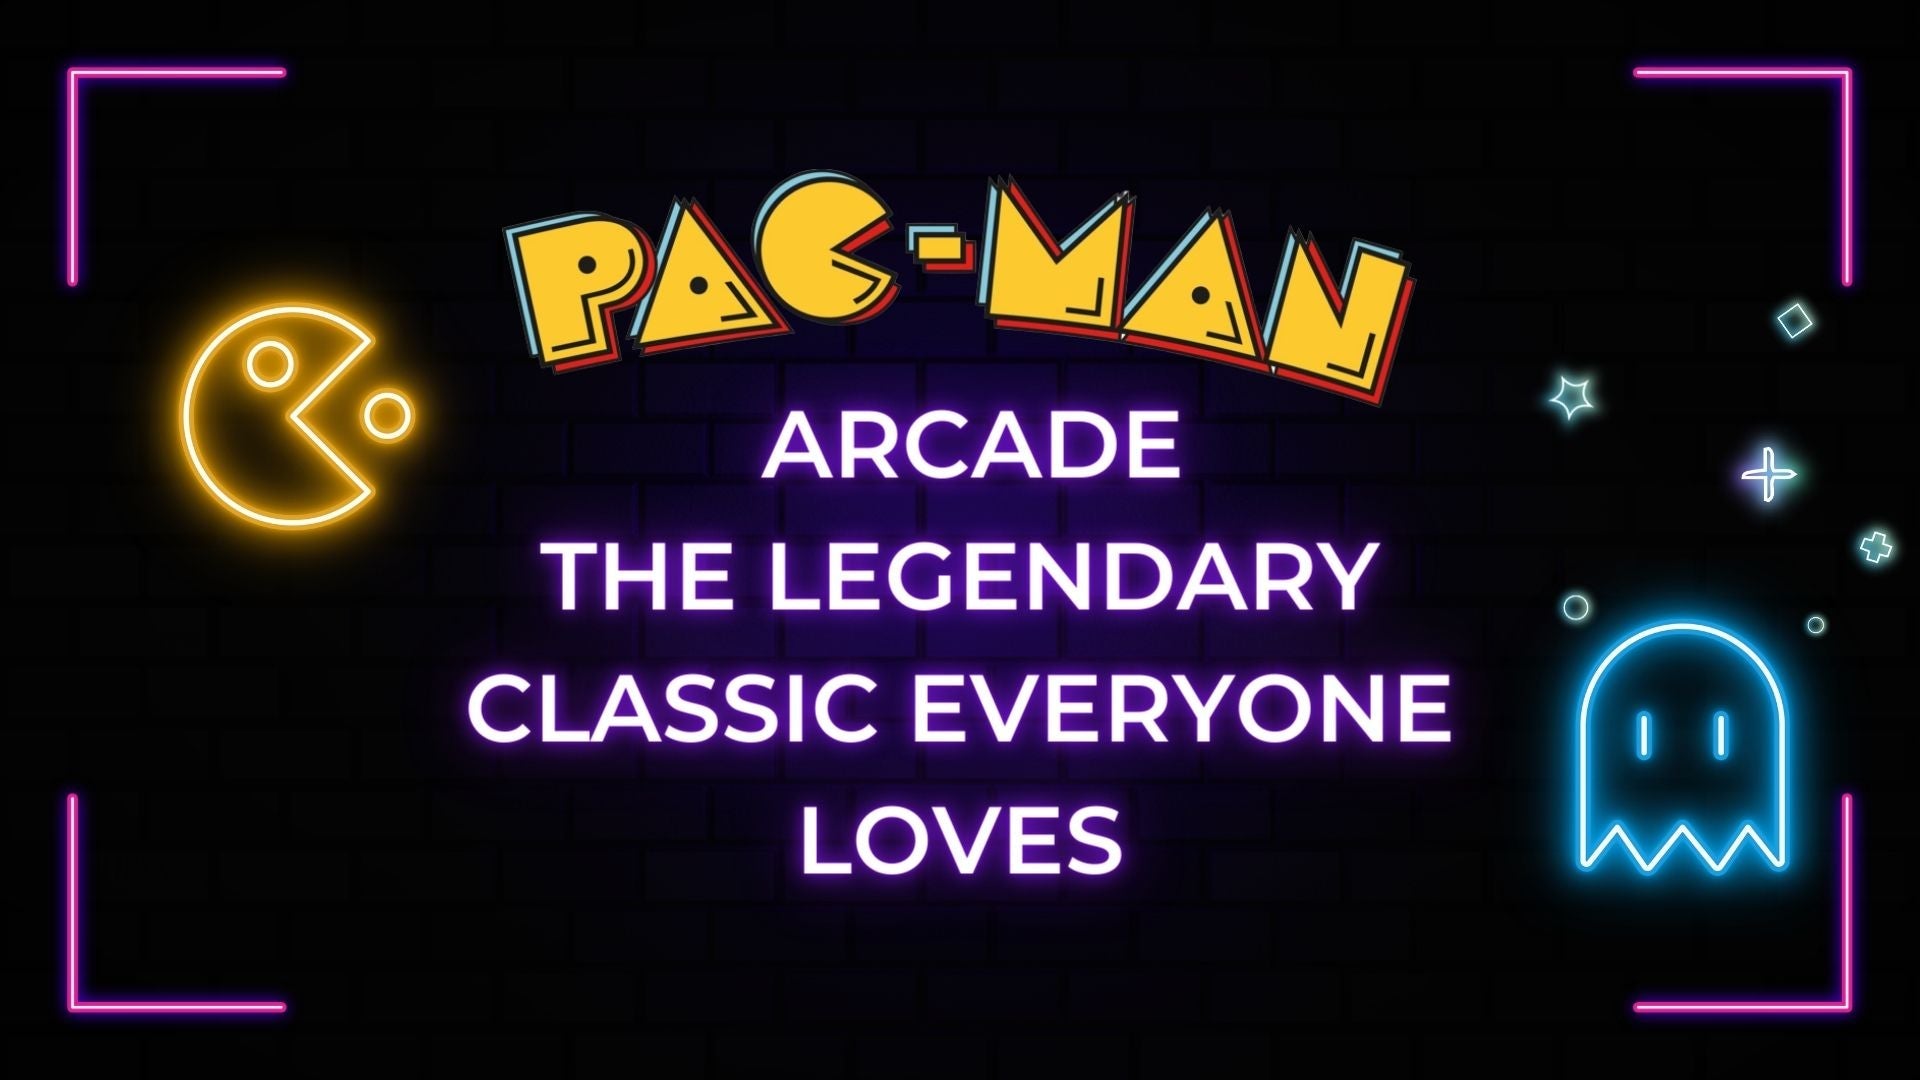 The legendary Pac-Man arcade: A classic game that continues to thrill players - Gamestate